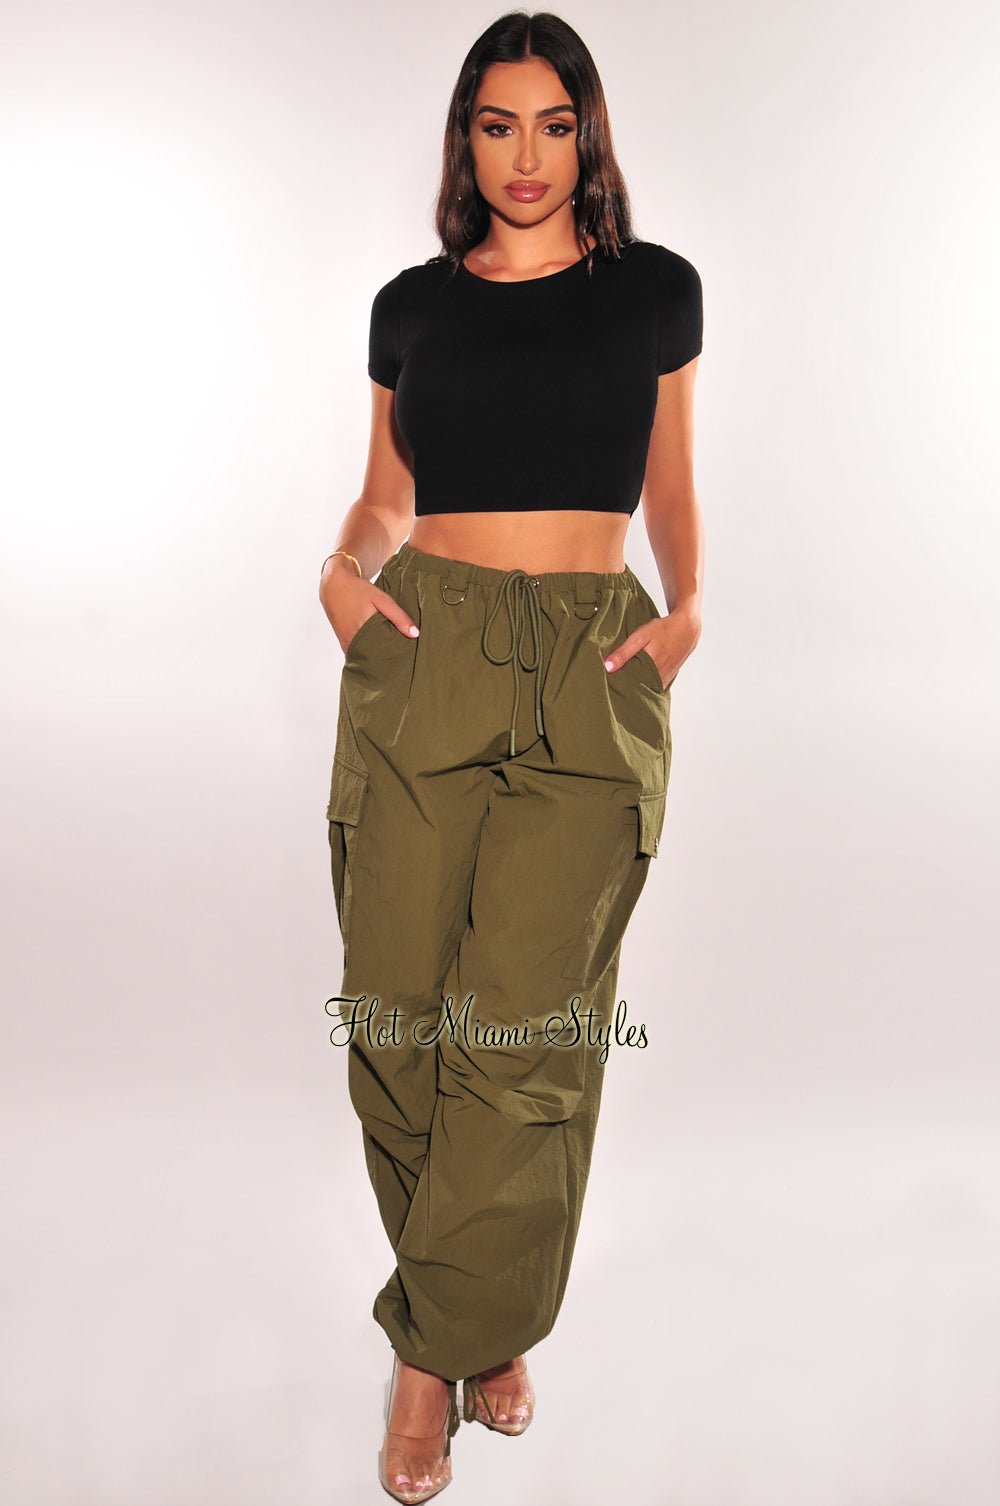 Silver Metallic Low Rise Snatched Drawstring Parachute Pants – Hot Miami  Styles